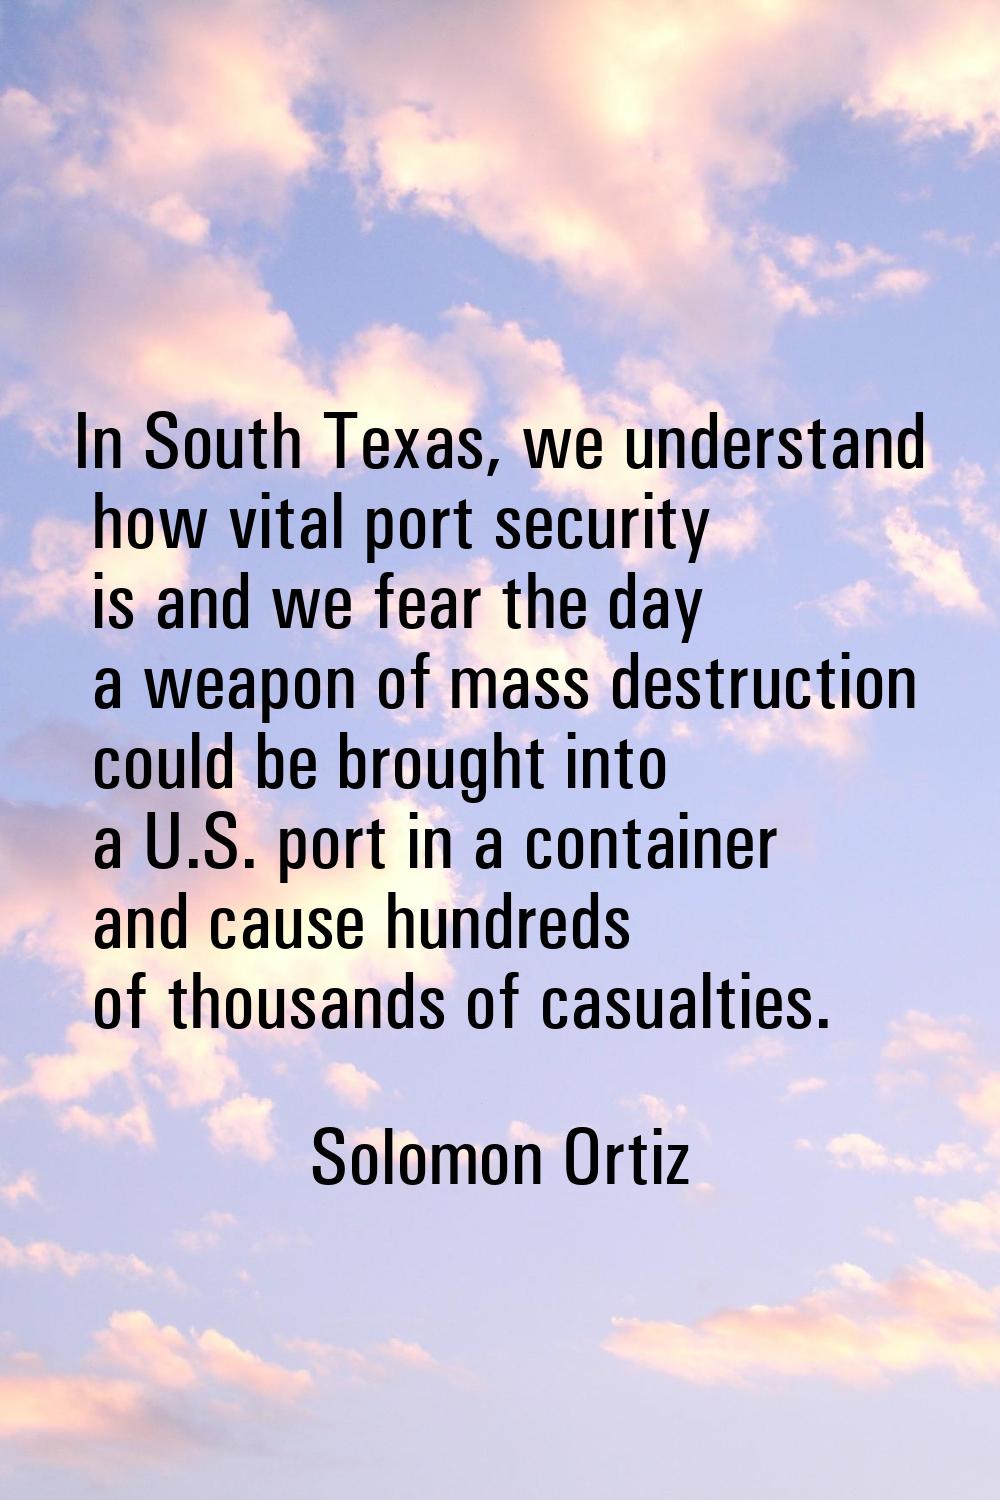 In South Texas, we understand how vital port security is and we fear the day a weapon of mass destr